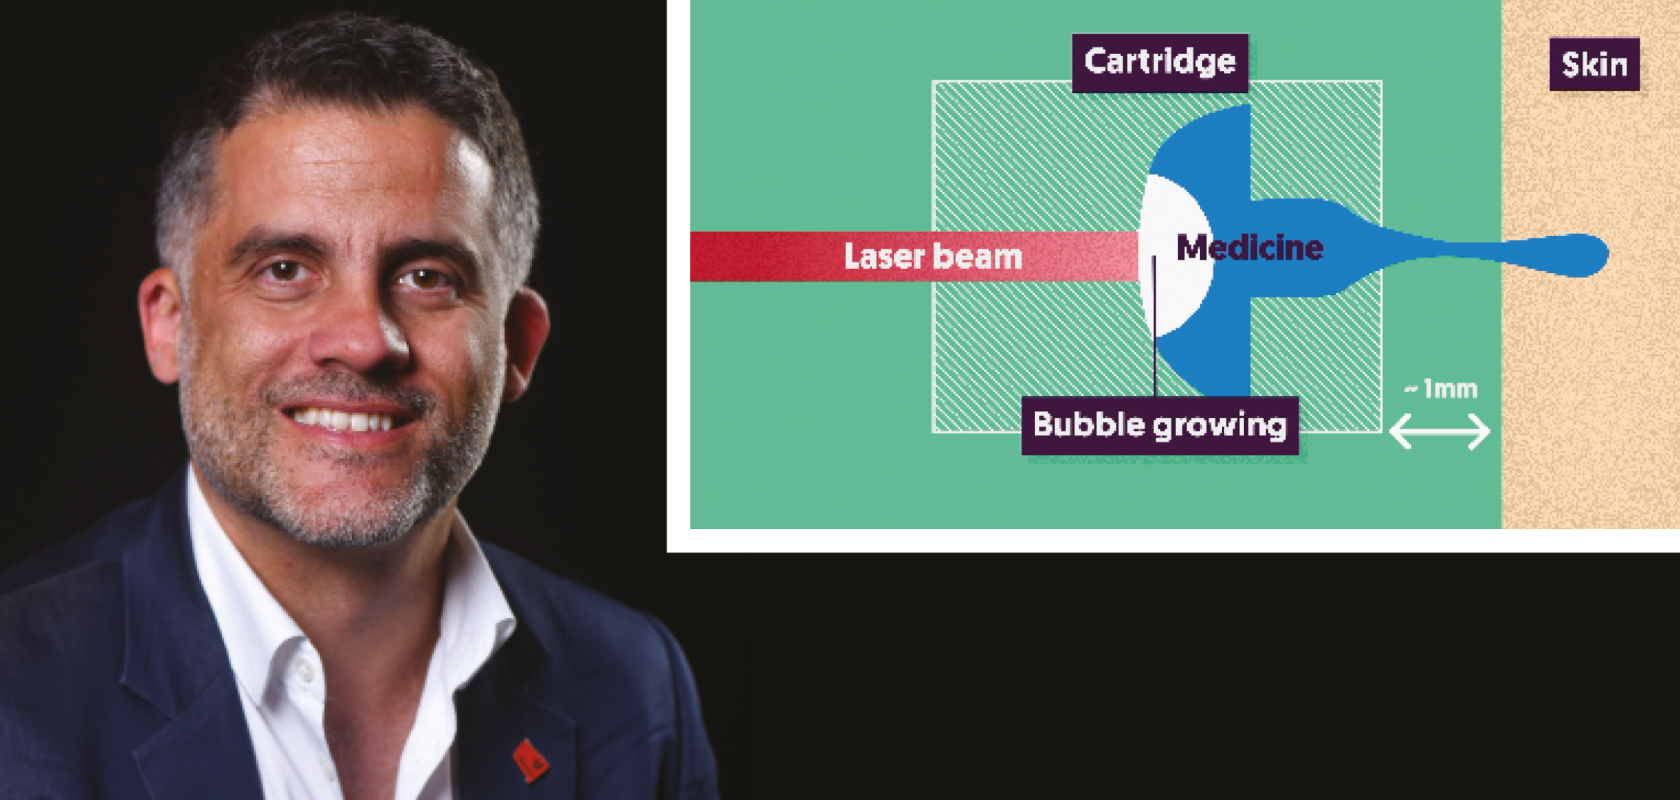 David Fernandez-Rivas, the co-founder of Flowbeams, and a diagram showing how the laser injector works